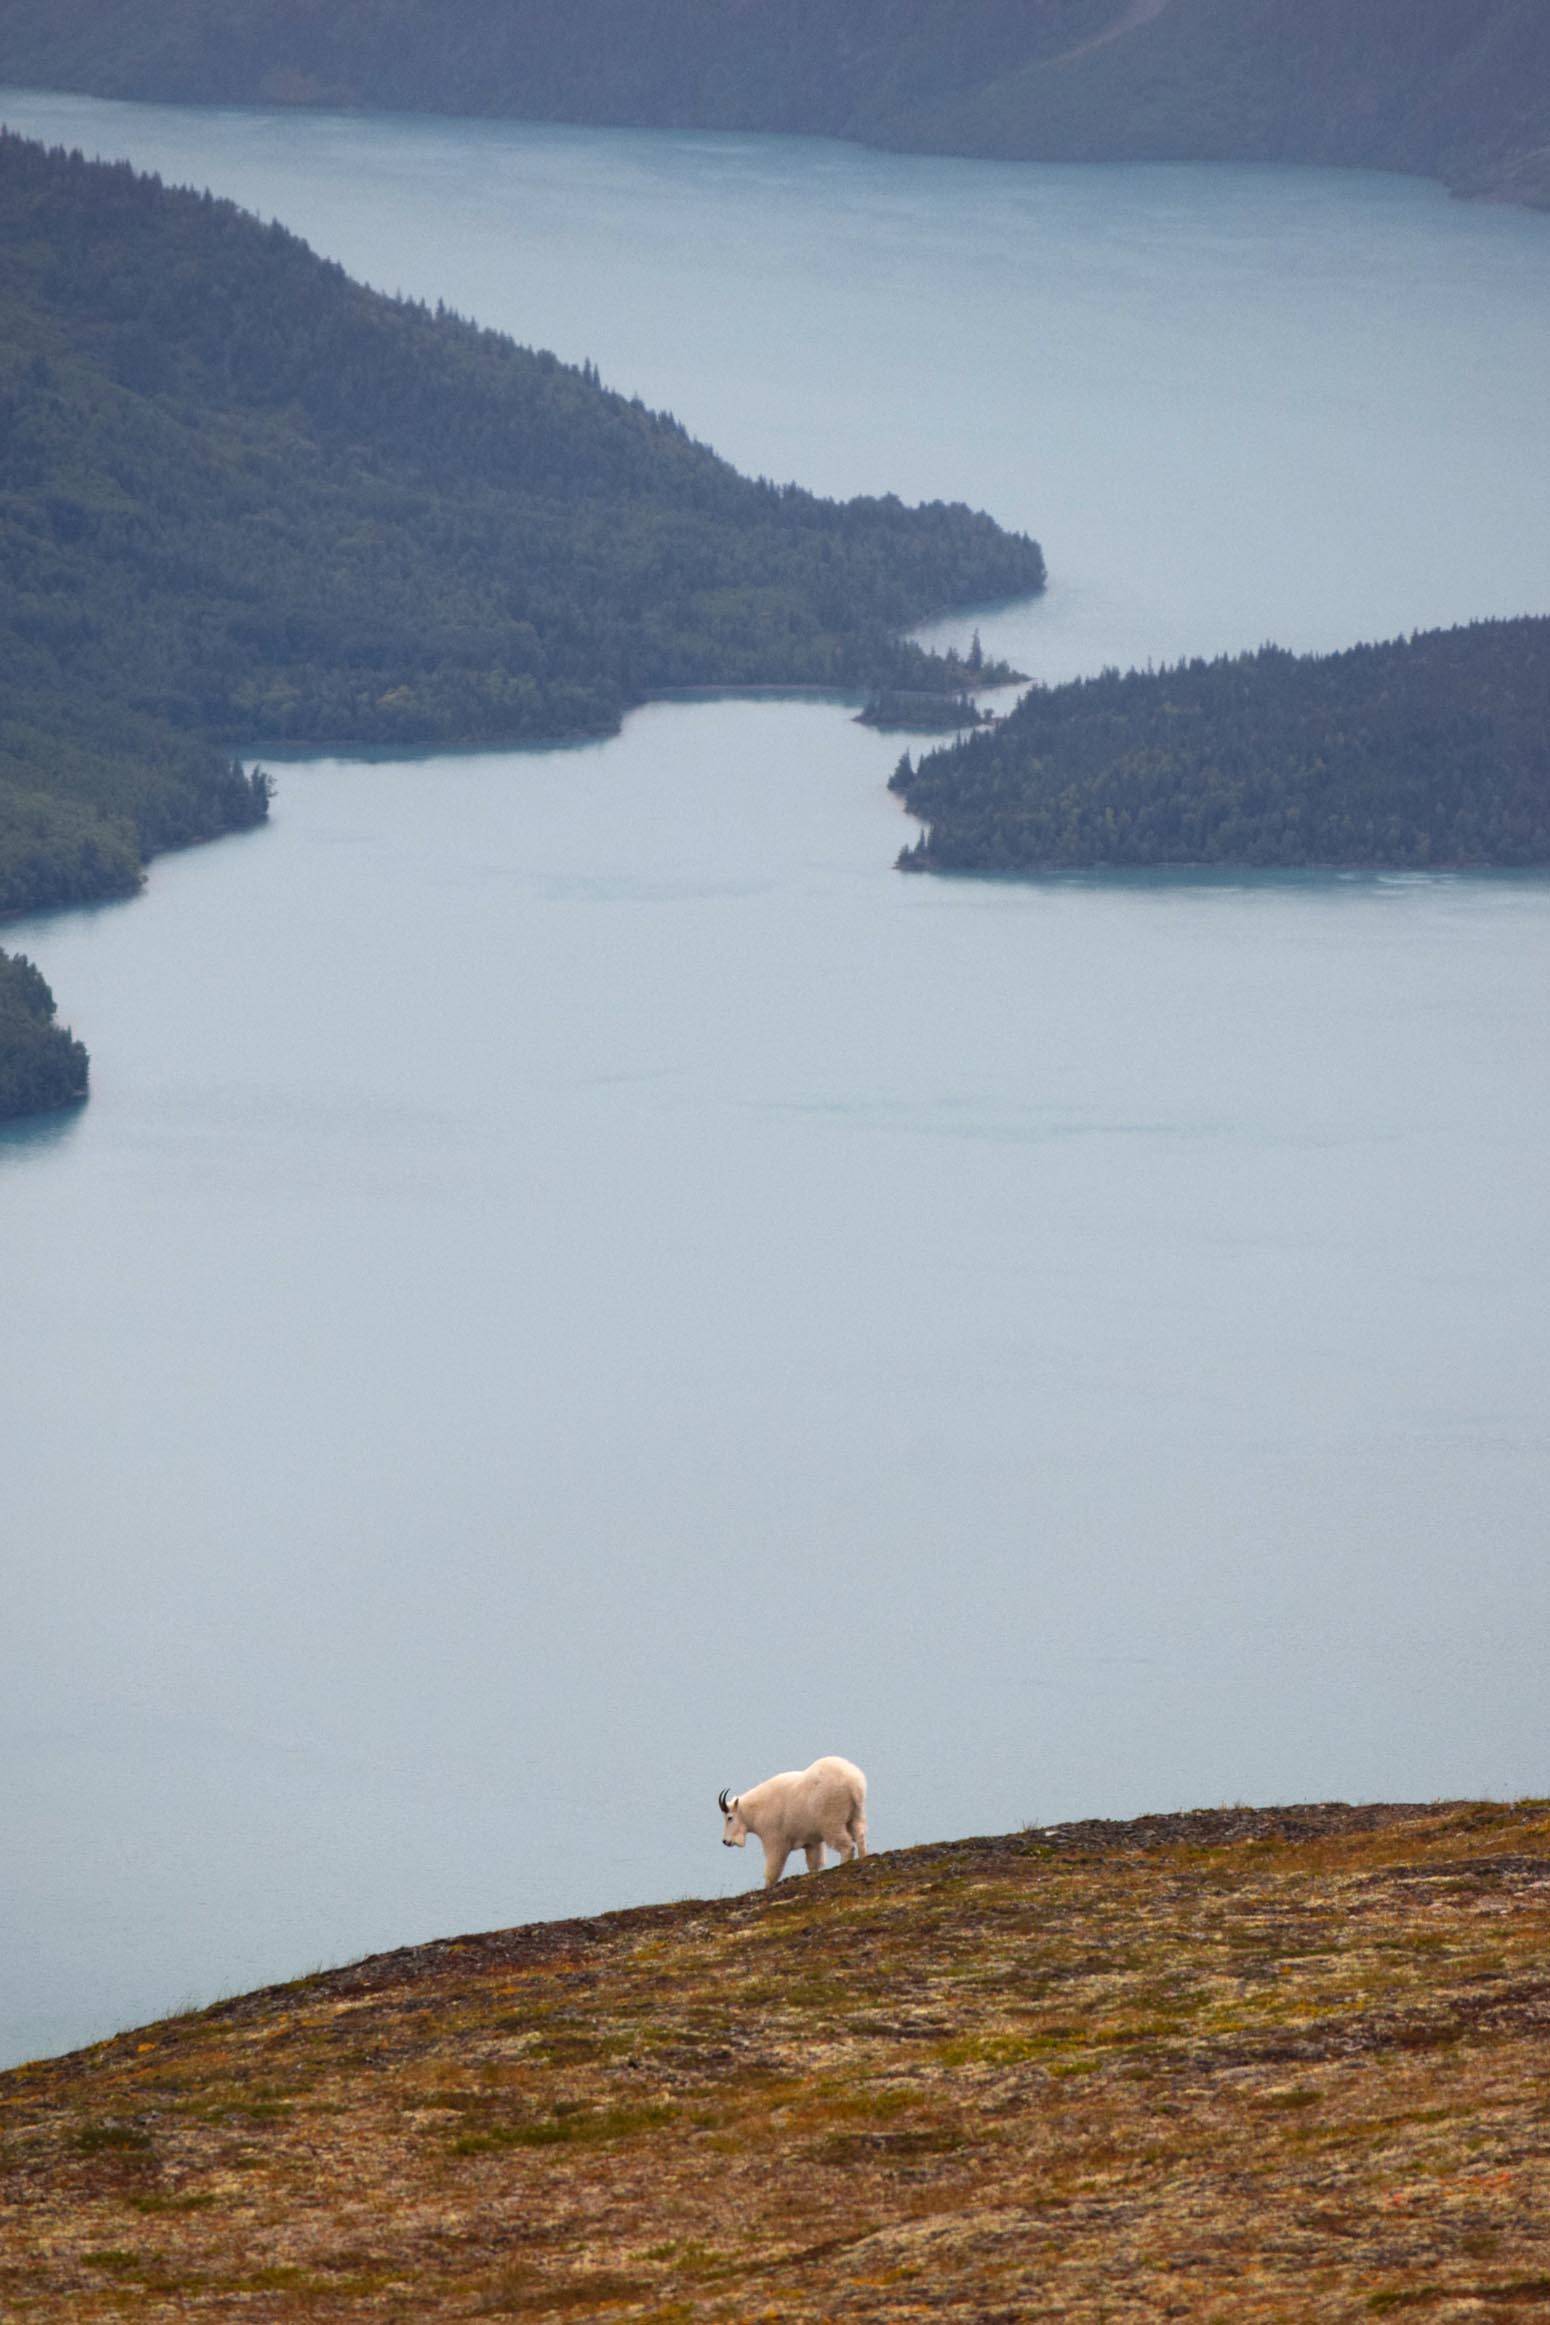 In this August 28, 2017 photo, a mountain goat descends the side of Cecil Rhode Mountain above Kenai Lake near Cooper Landing, Alaska. Mountain goats in Alaska typically live in remote alpine habitats. (Photo by Kat Sorensen/Peninsula Clarion)